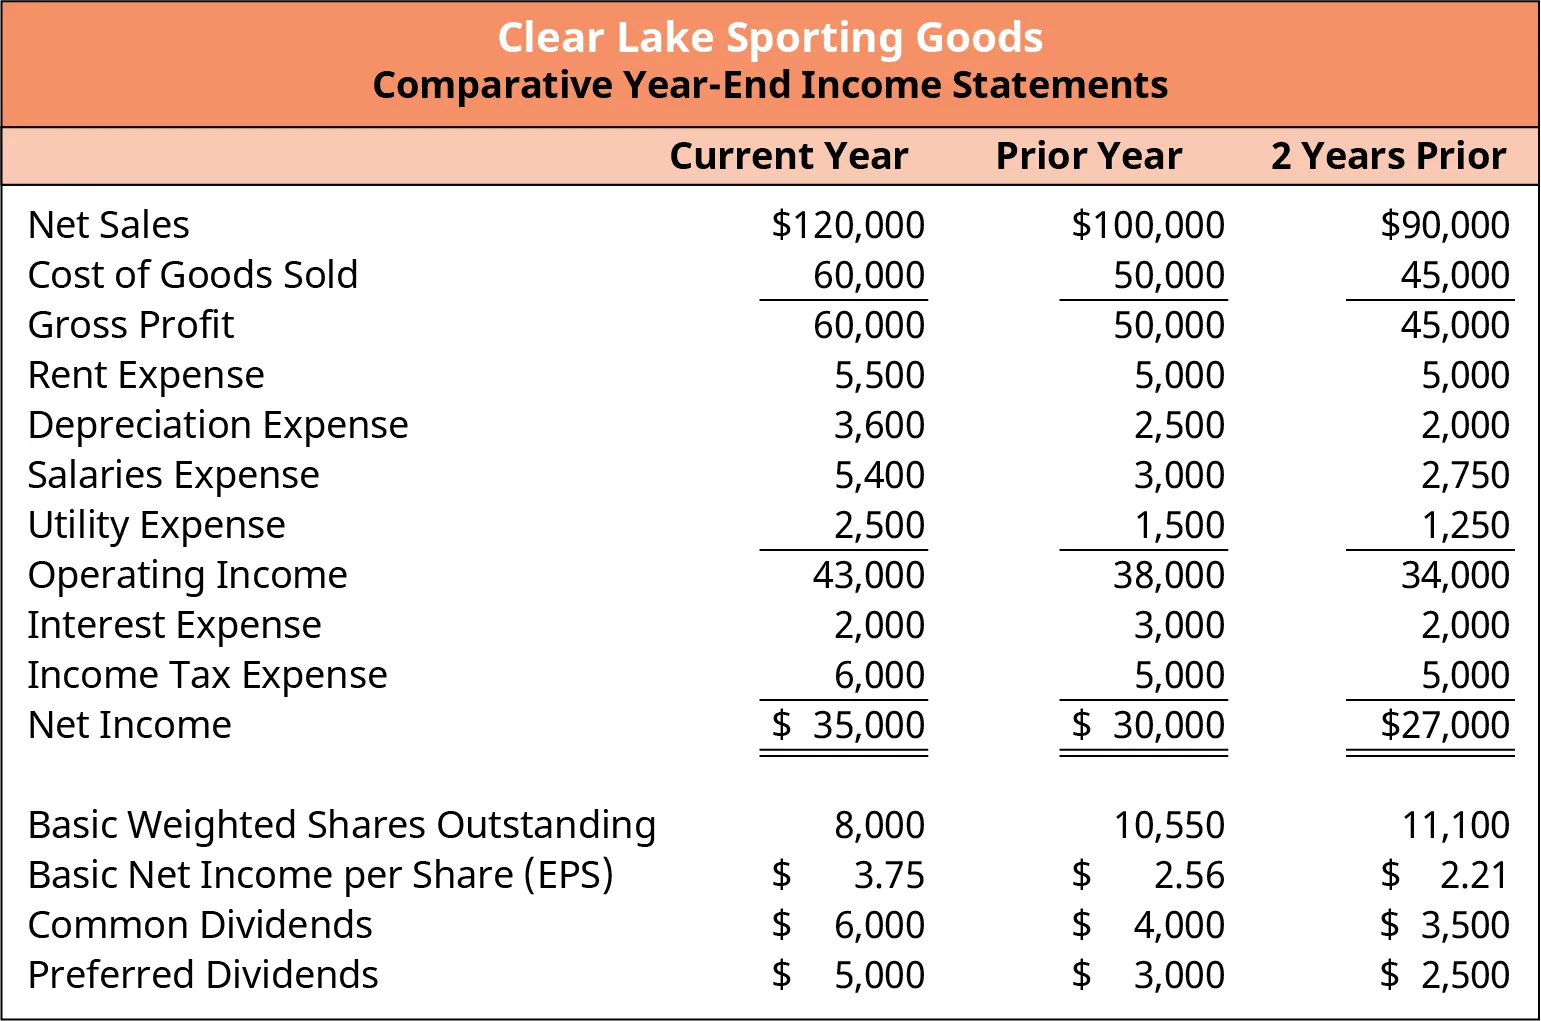 A financial statement for Clear Lake Sporting Goods shows comparative year-end income statements, comparing the current year, the prior year, and 2 years prior. Respectively, net sales is $120,000, $100,000 and $90,000. Cost of goods sold and gross profit are $60,000, $50,000 and $45,000. Rent expense for the current year is $5,500; for the other two years rent is $5,000. Depreciation expense is $3,600, $2,500 and $2,000. Salaries expense is $5,400, $3,000 and $2,750. Utility expense is $2,500, $1,500 and $1,250. Operating Income is $43,000, $38,000 and $34,000. Interest expense is $2,000, $3,000 and $2,000. Income tax expense is $6,000, $5,000 and $5,000. Net income is $35,000, $30,000 and $27,000. The Basic weighted shares outstanding is 8,000, 10,550 and 11,100. Basic net income per share (EPS) is $3.75, $2.56 and $2.21. Common dividends is $6,000, $4,000 and $3,500. Preferred dividends is $5,000, $3,000 and $2,500.